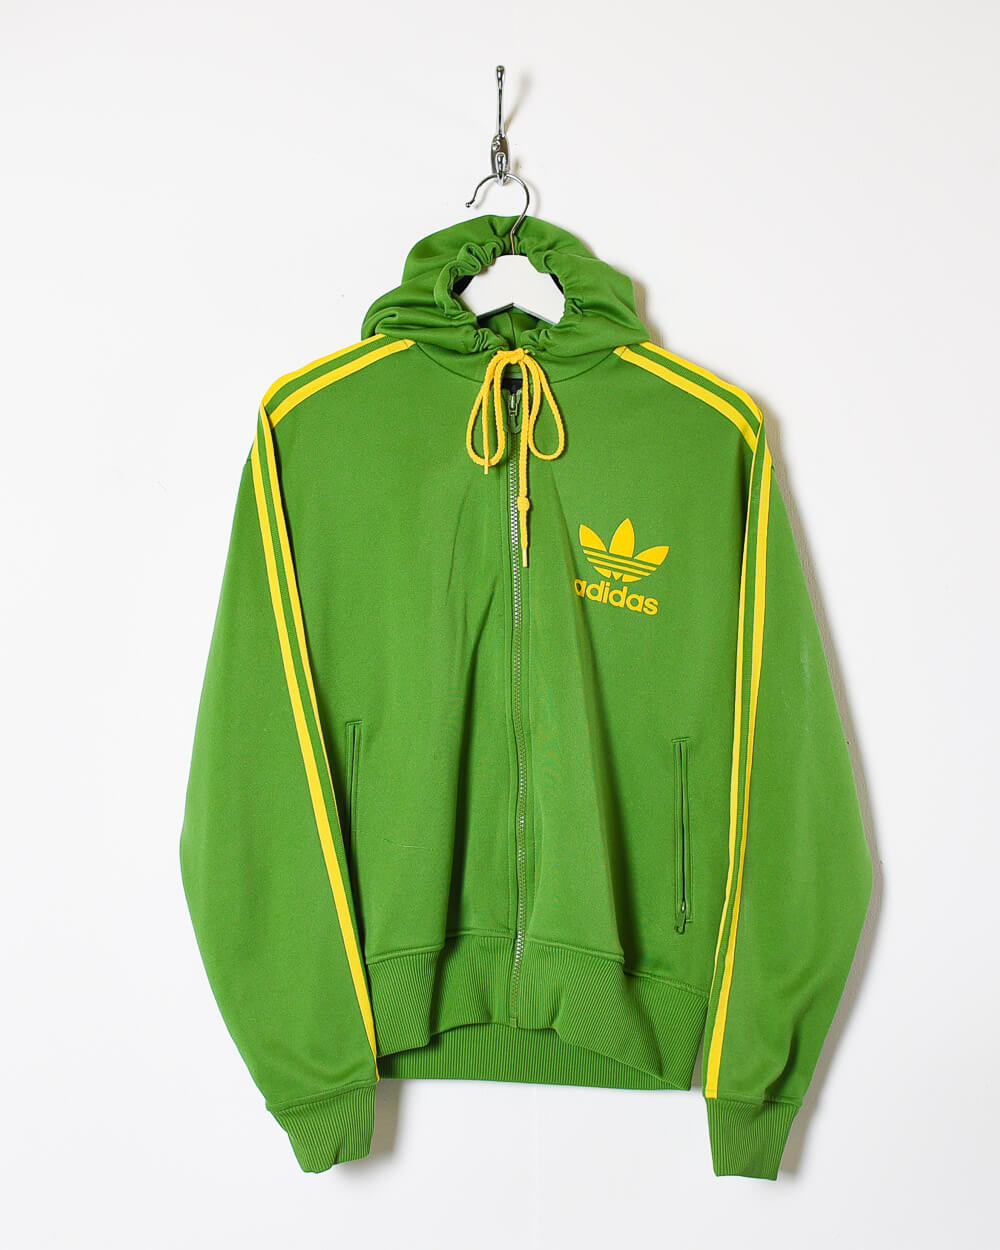 Green Adidas Tracksuit Top - Small